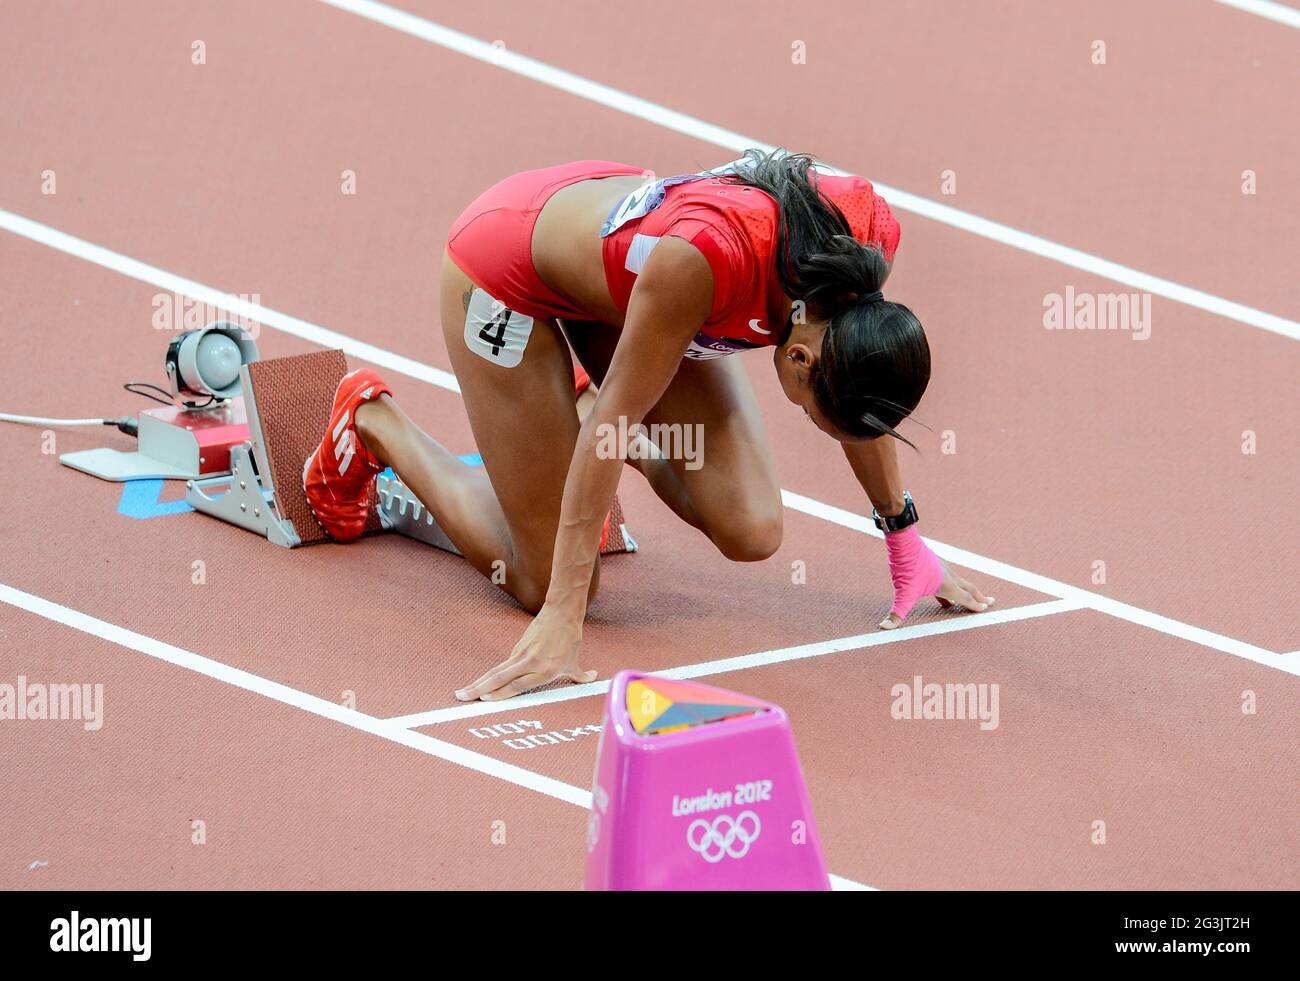 LONDON, ENGLAND - AUGUST 5, T’erea Brown of the Unites States in the women’s 400m hurdles during the evening session of athletics at the Olympic Stadium  on August 5, 2012 in London, England Photo by Roger Sedres / Gallo Images Stock Photo